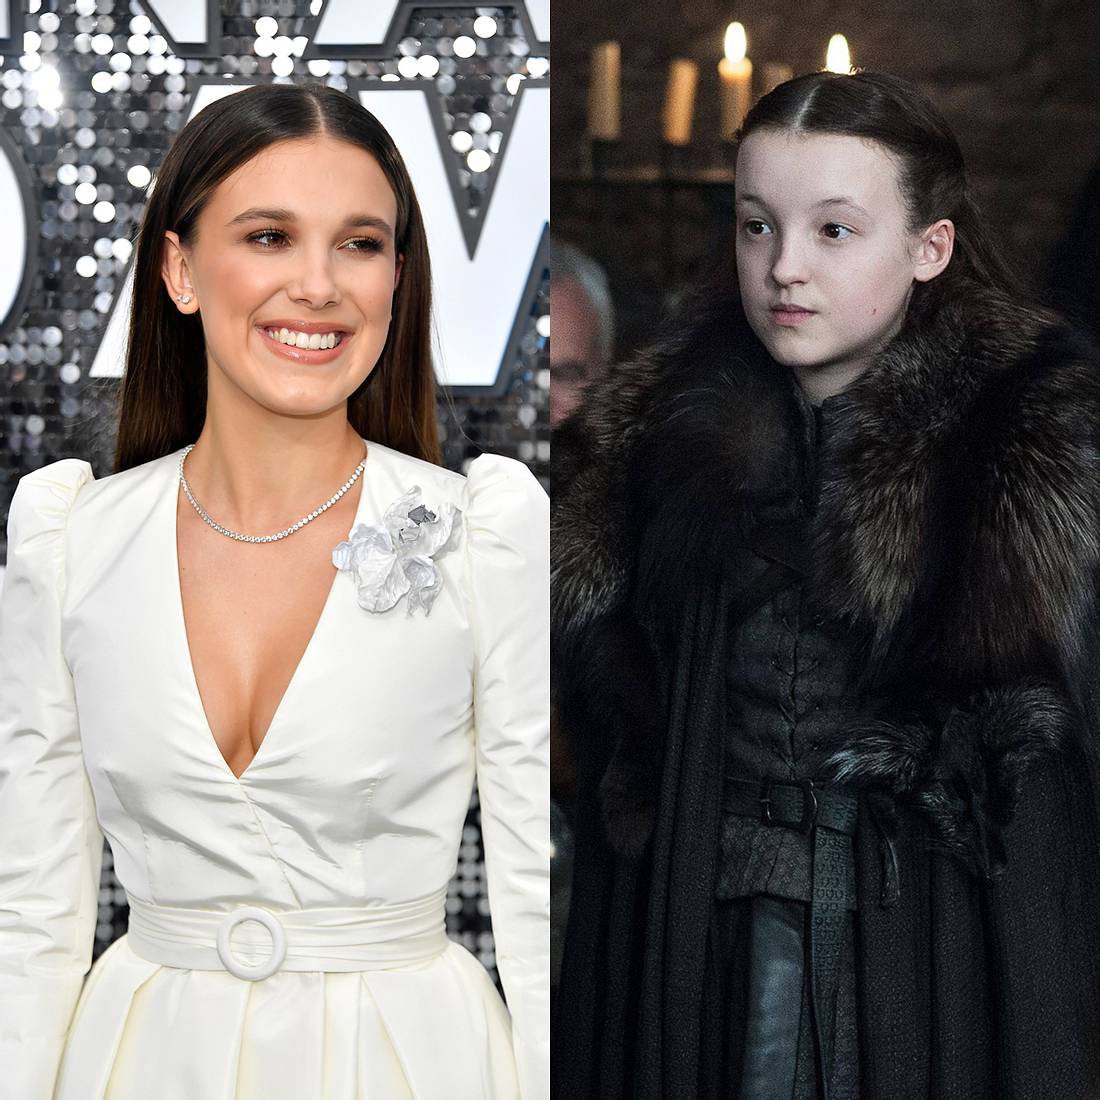 Traum-Rolle abgelehnt: Millie Bobby Brown „Game Of Thrones“